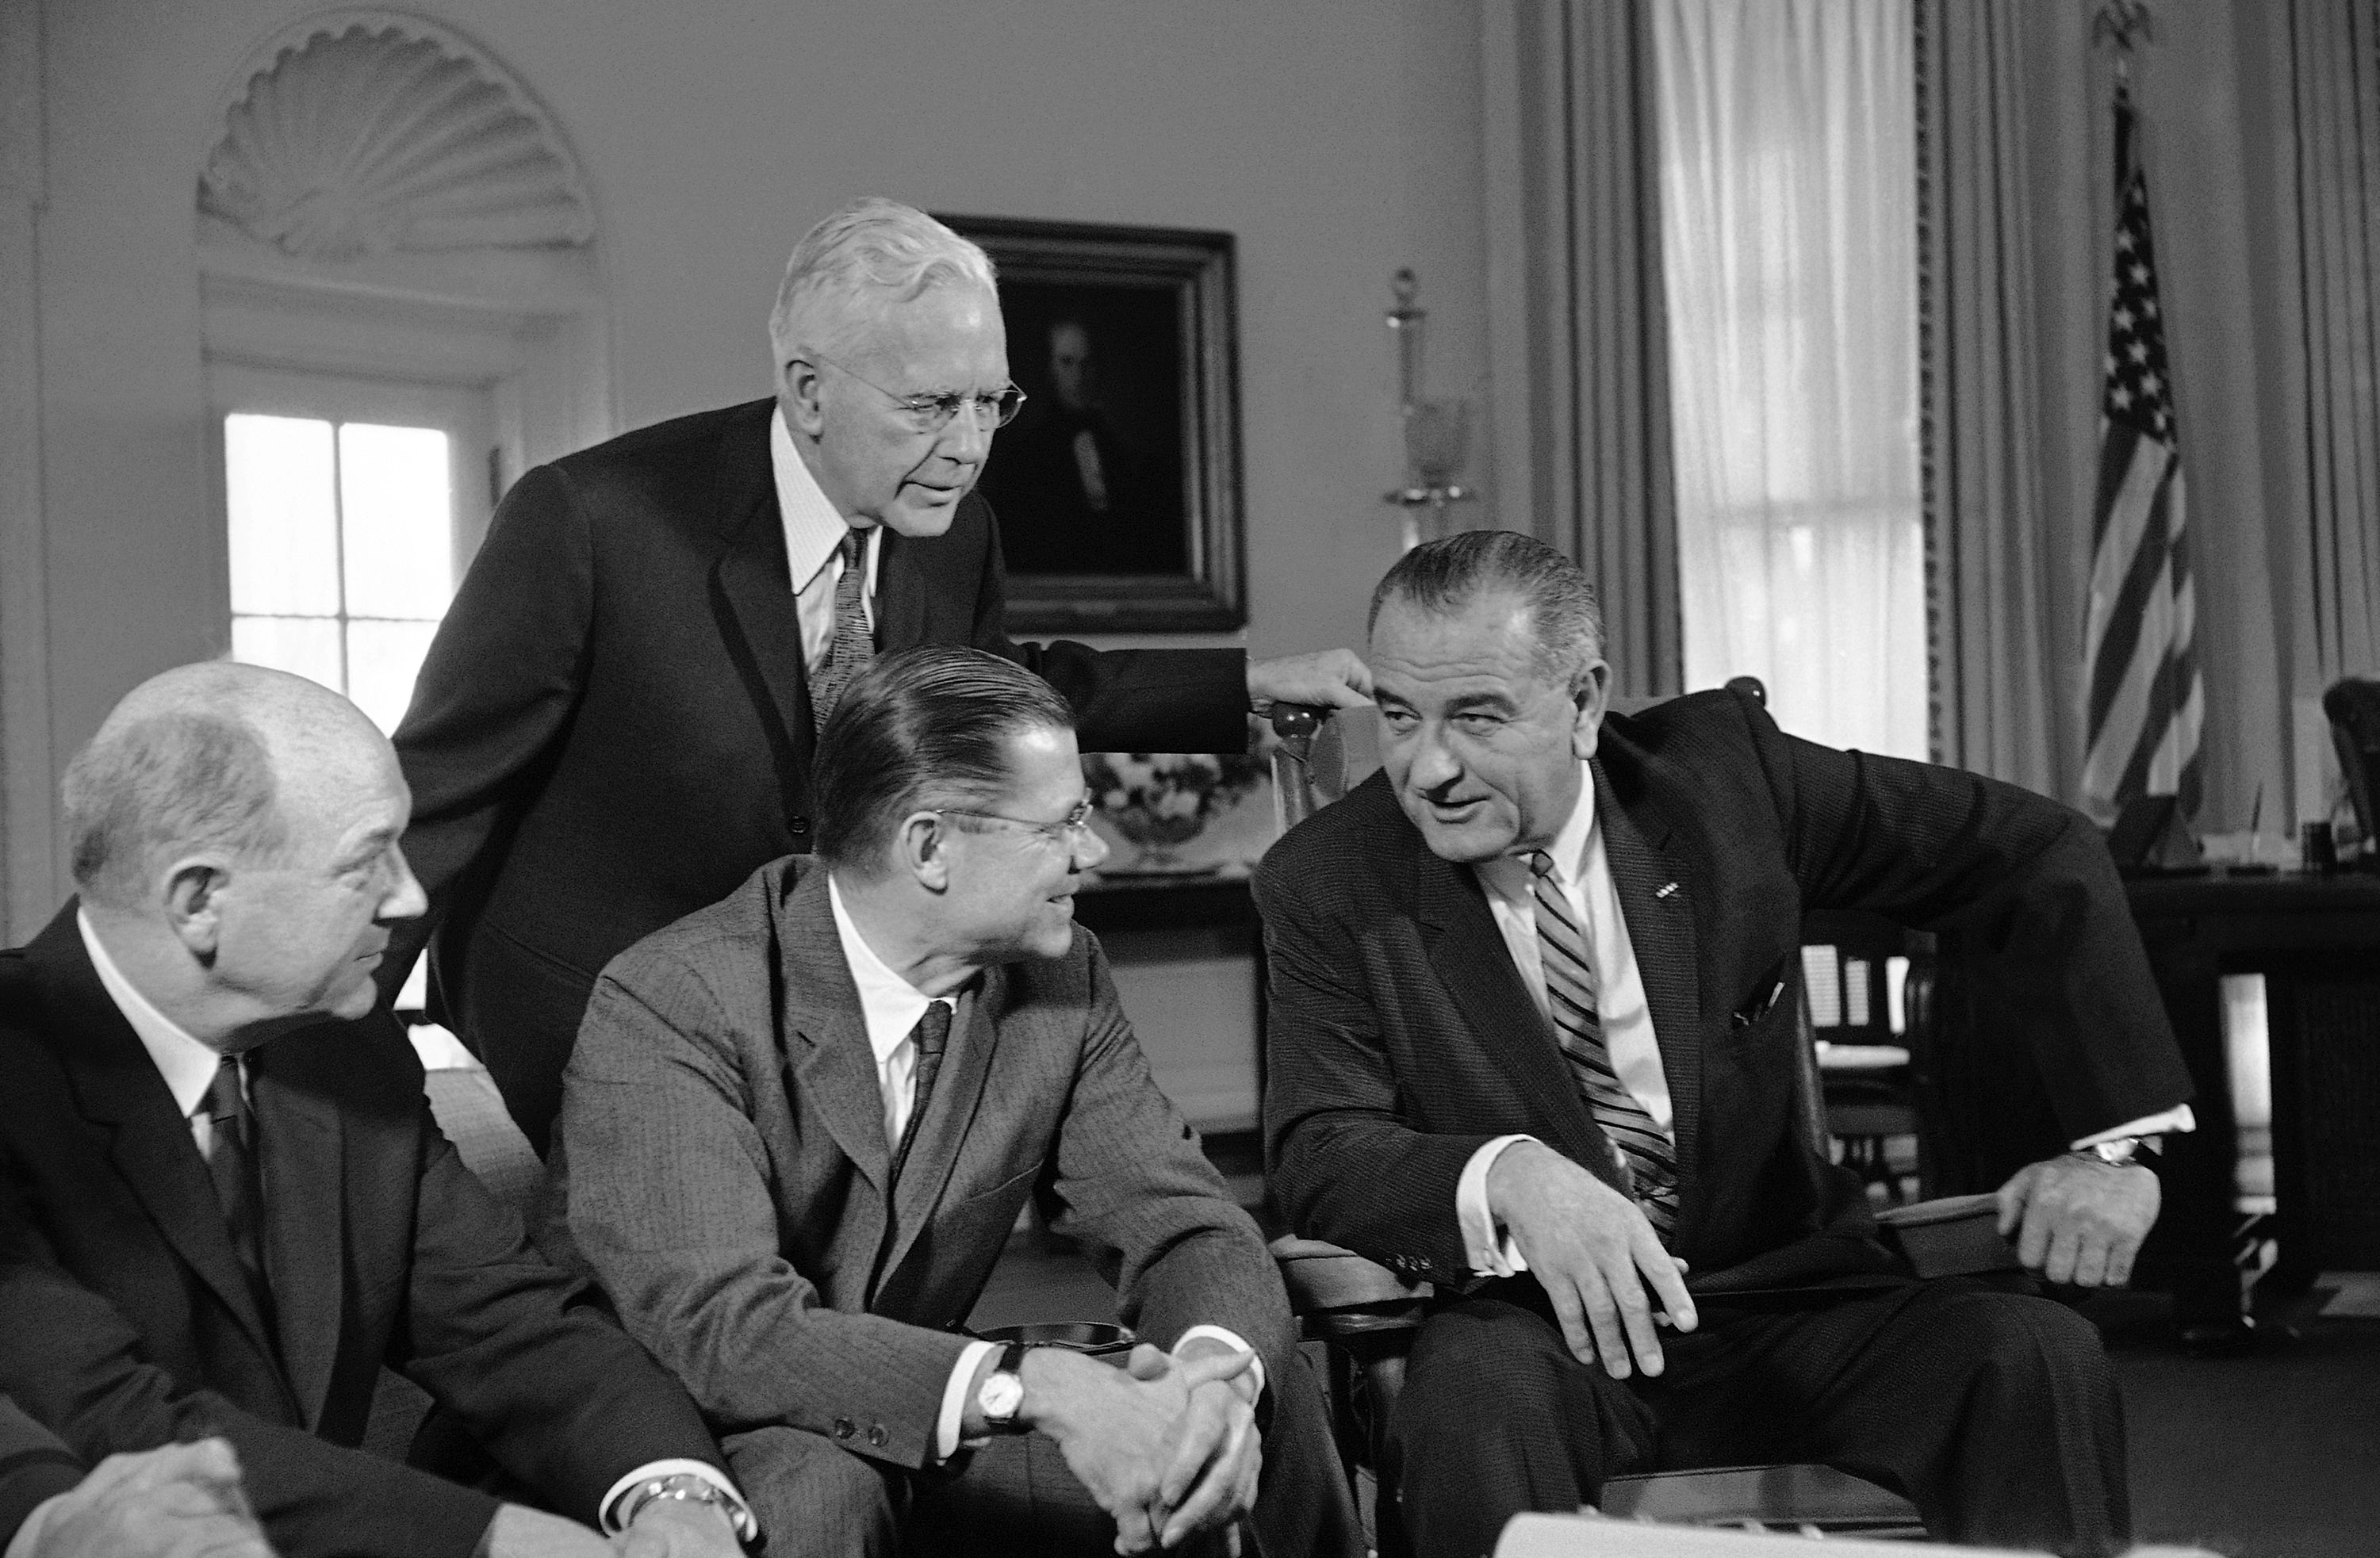 In this March 13, 1964 file photo, President Lyndon Johnson, right, talks with Secretary of Defense Robert McNamara, center sitting, after McNamara returned from a fact-finding trip to South Vietnam, at the White House in Washington. Fifty years ago Sunday, Aug. 10, 2014, reacting to reports of a U.S. Navy encounter with enemy warships in the Gulf of Tonkin off Vietnam, reports long since discredited, Johnson signed a resolution passed overwhelmingly by Congress that historians call the crucial catalyst for deep American involvement in the Vietnam War. (AP Photo/File)